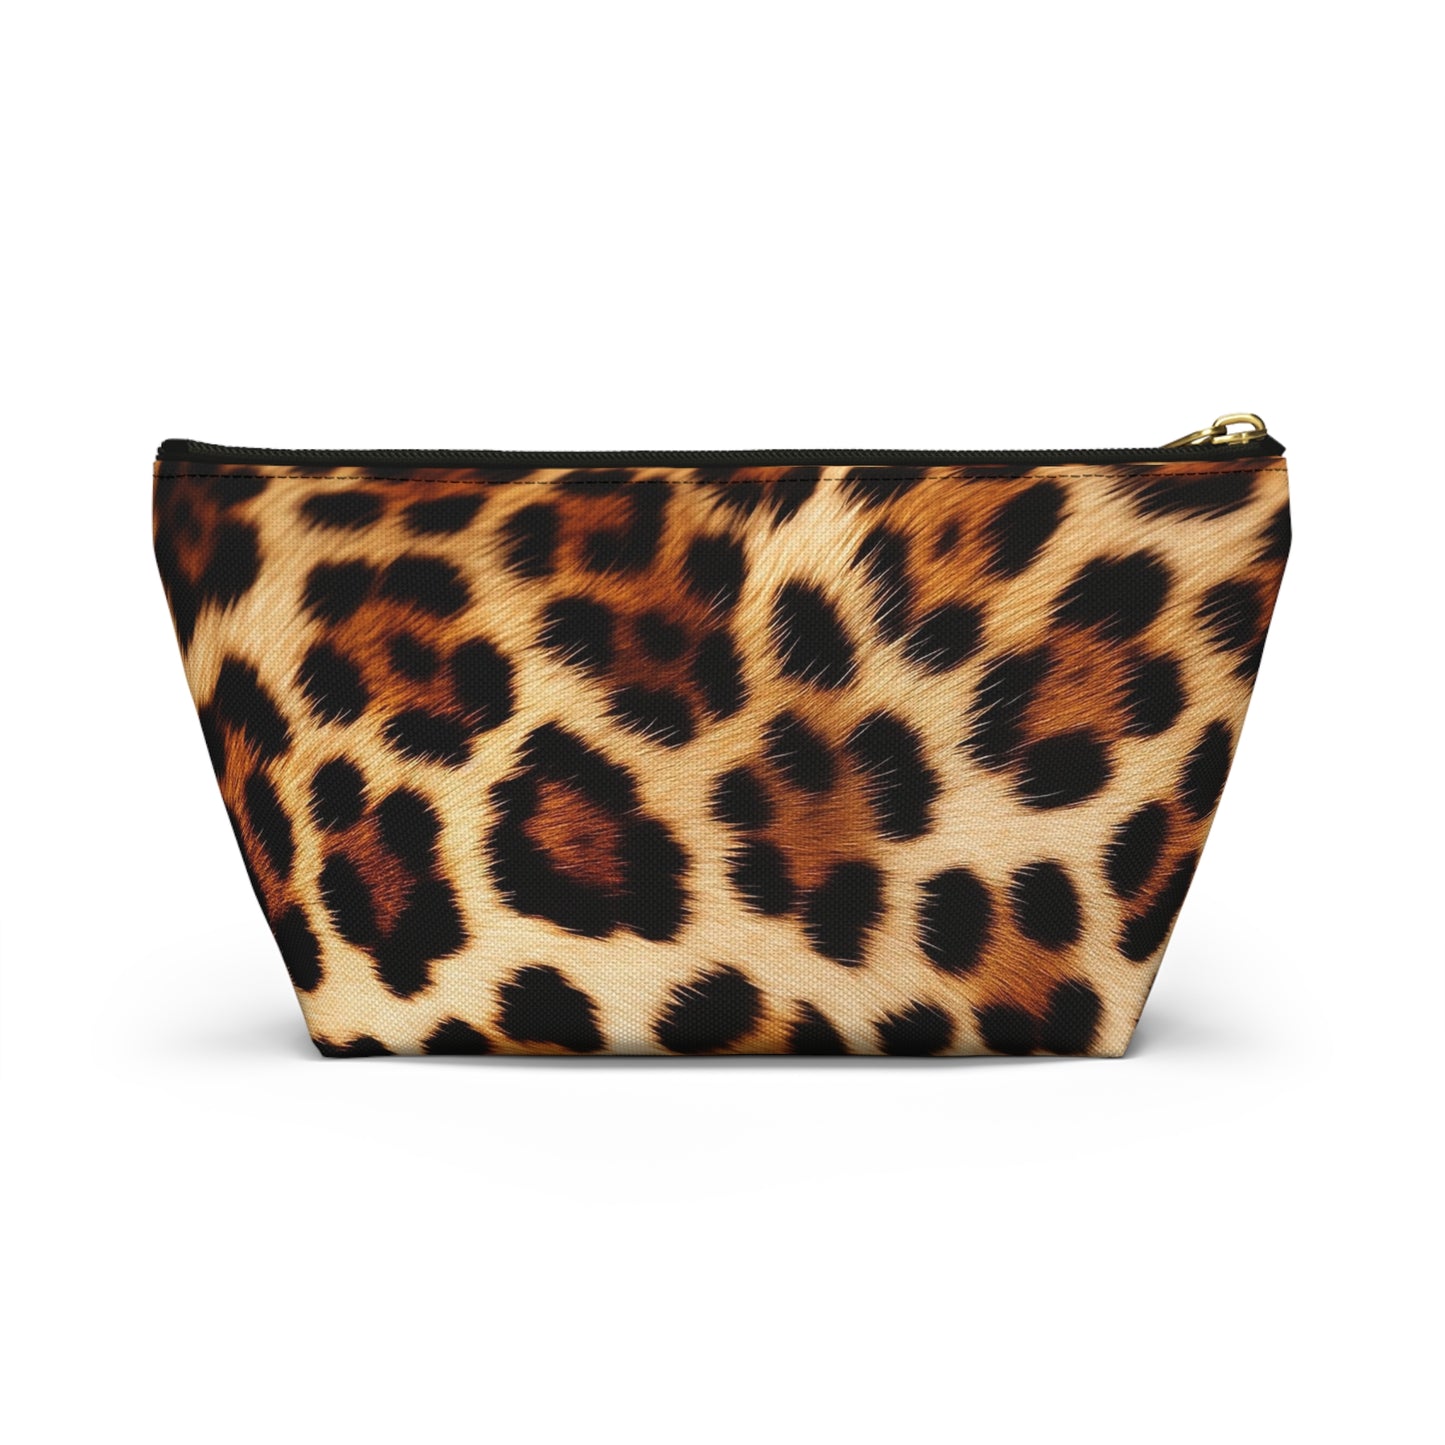 Leopard Print Pouch Bag, Animal Cheetah Canvas Travel Wash Makeup Toiletry Bath Organizer Zip Cosmetic Accessory Large Small Zipper